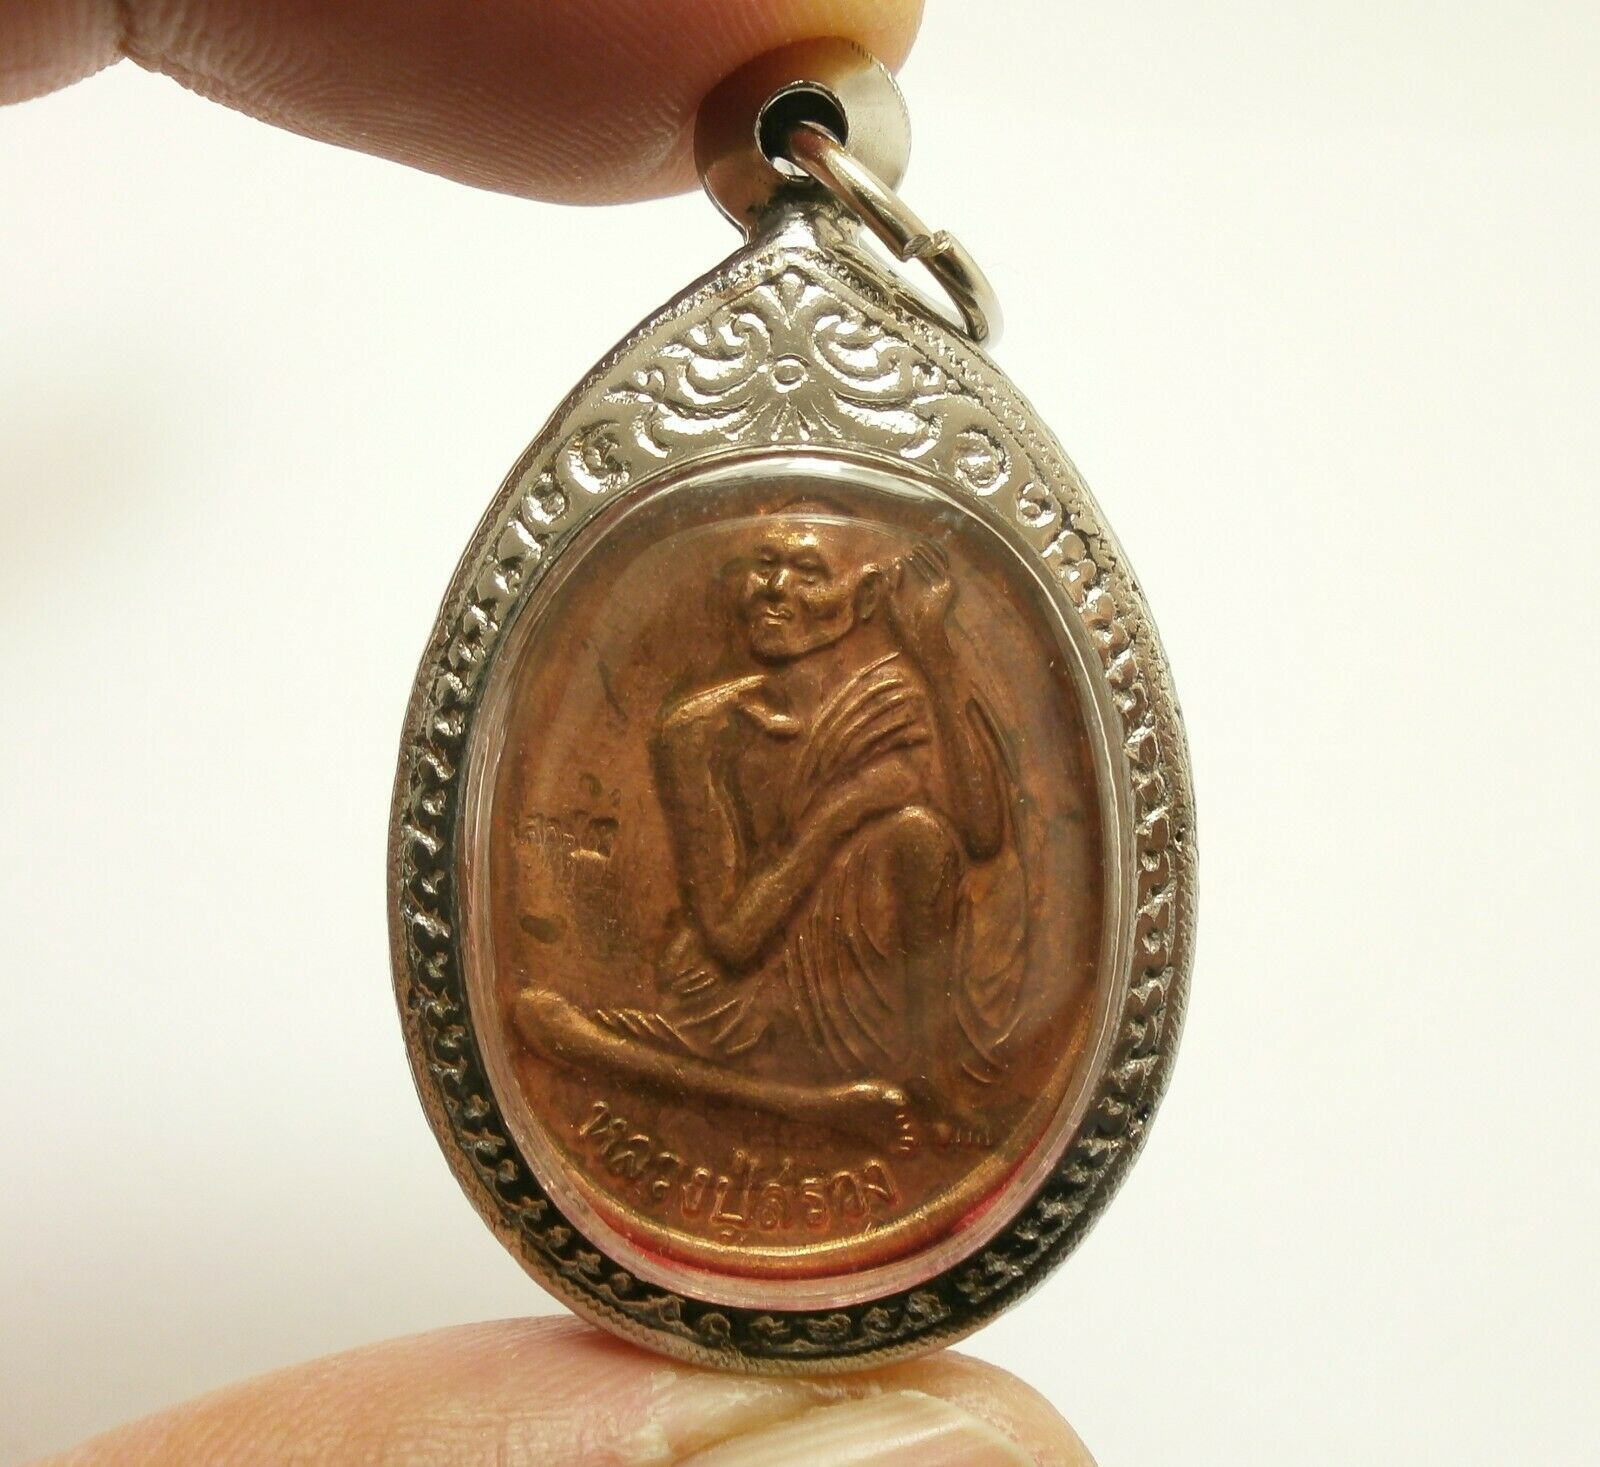 Primary image for LP SUANG TEVADA LENDIN 1ST BATCH IN 1997 BUDDHA MAGIC THAI AMULET LUCKY PENDANT